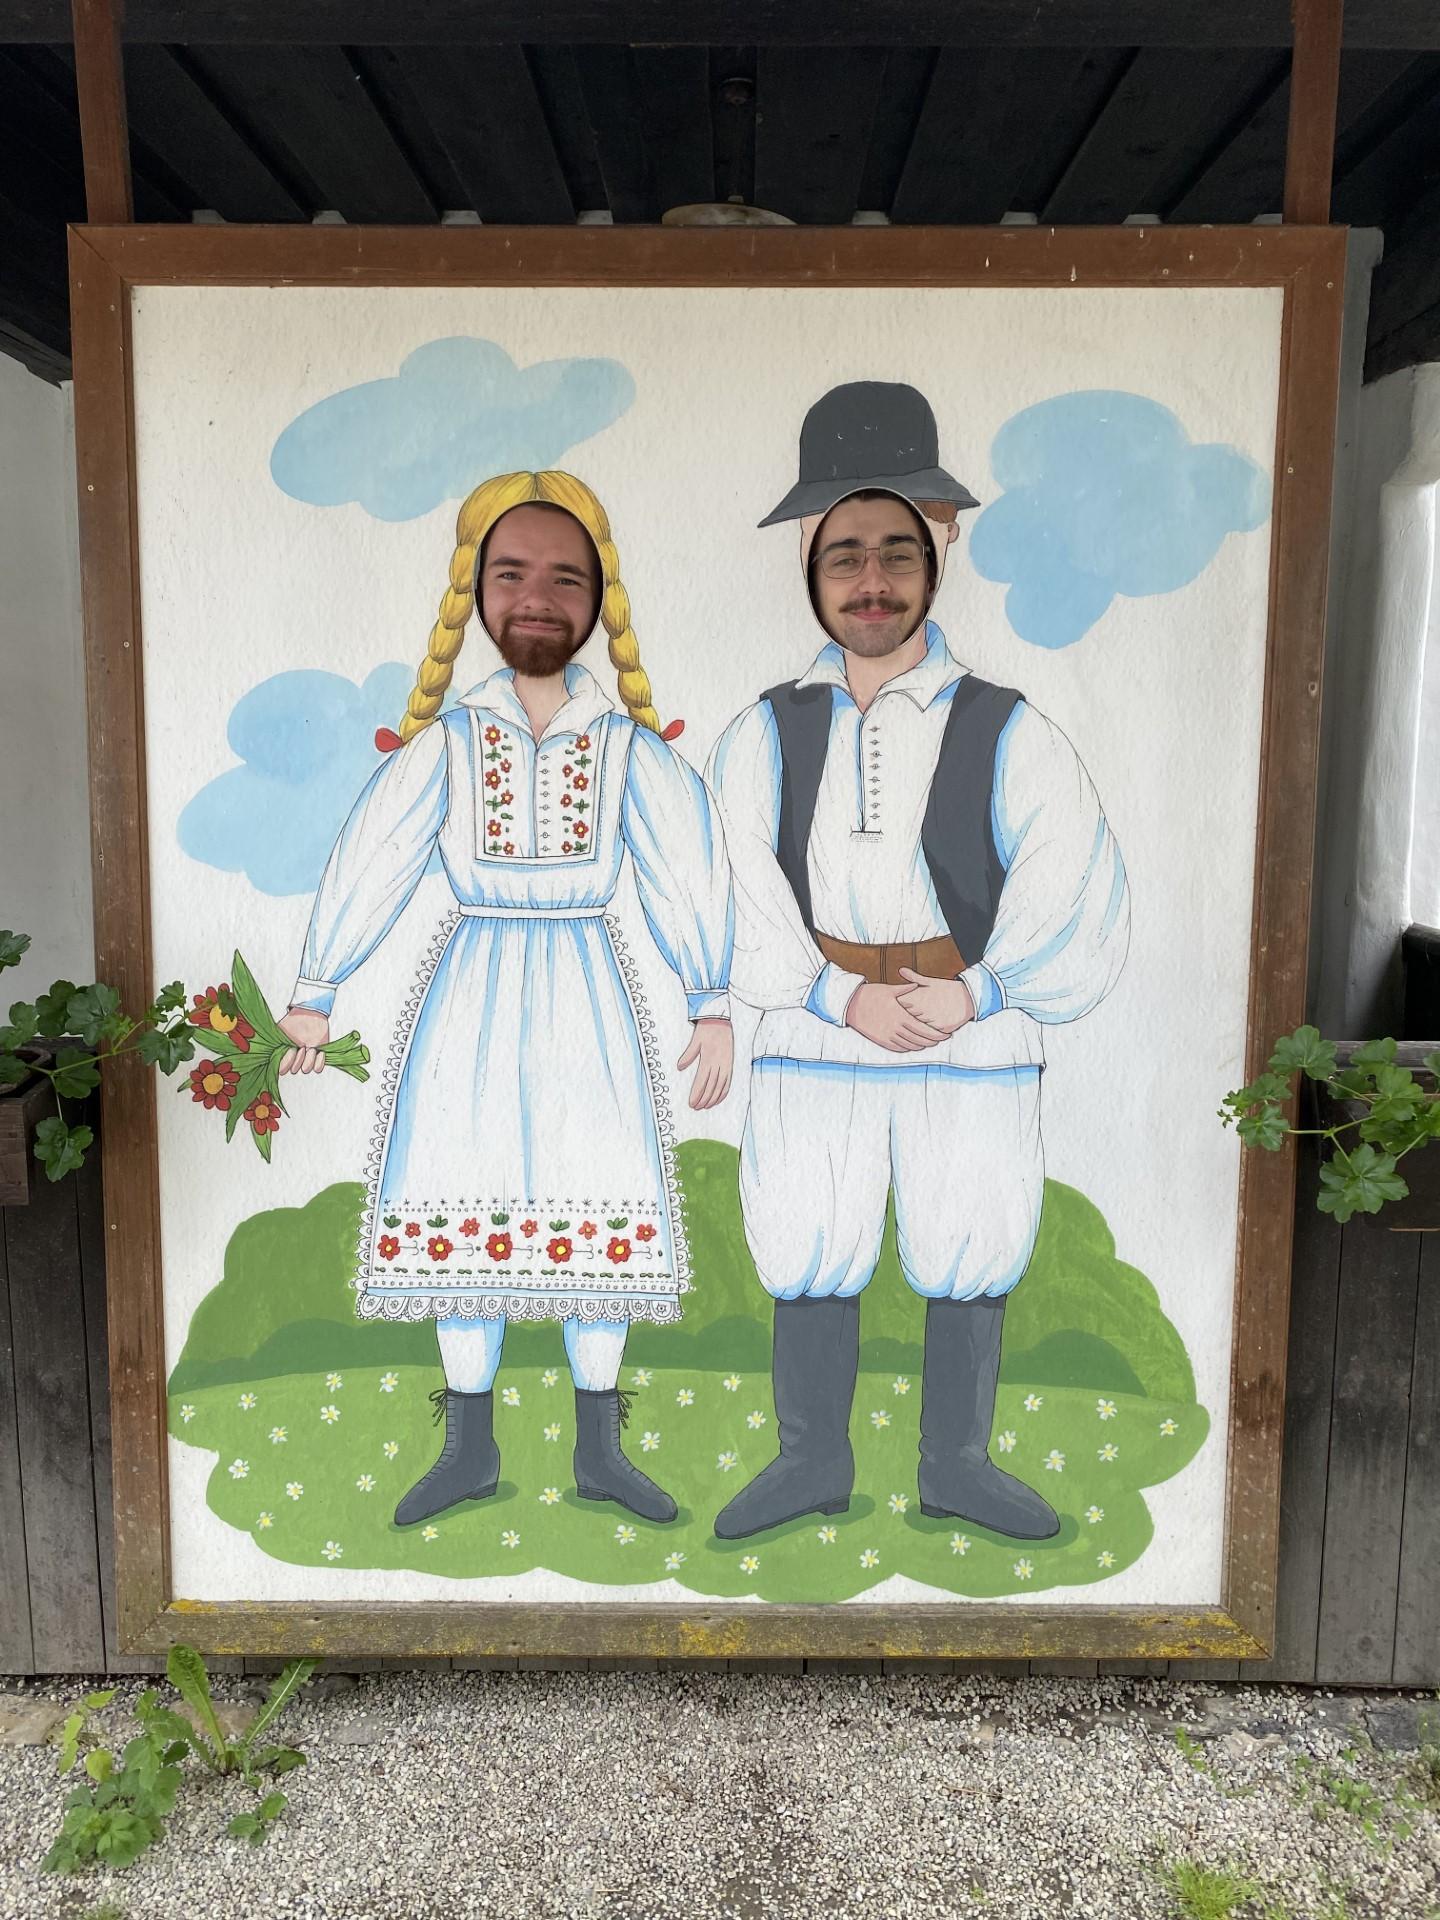 Bill Evans III: My friend Julien and I posing for a goofy picture depicting Zagorje customs from the late 19th to early 20th century at the Staro Selo Muzej (Old Village Museum) in Kumrovec, Croatia.